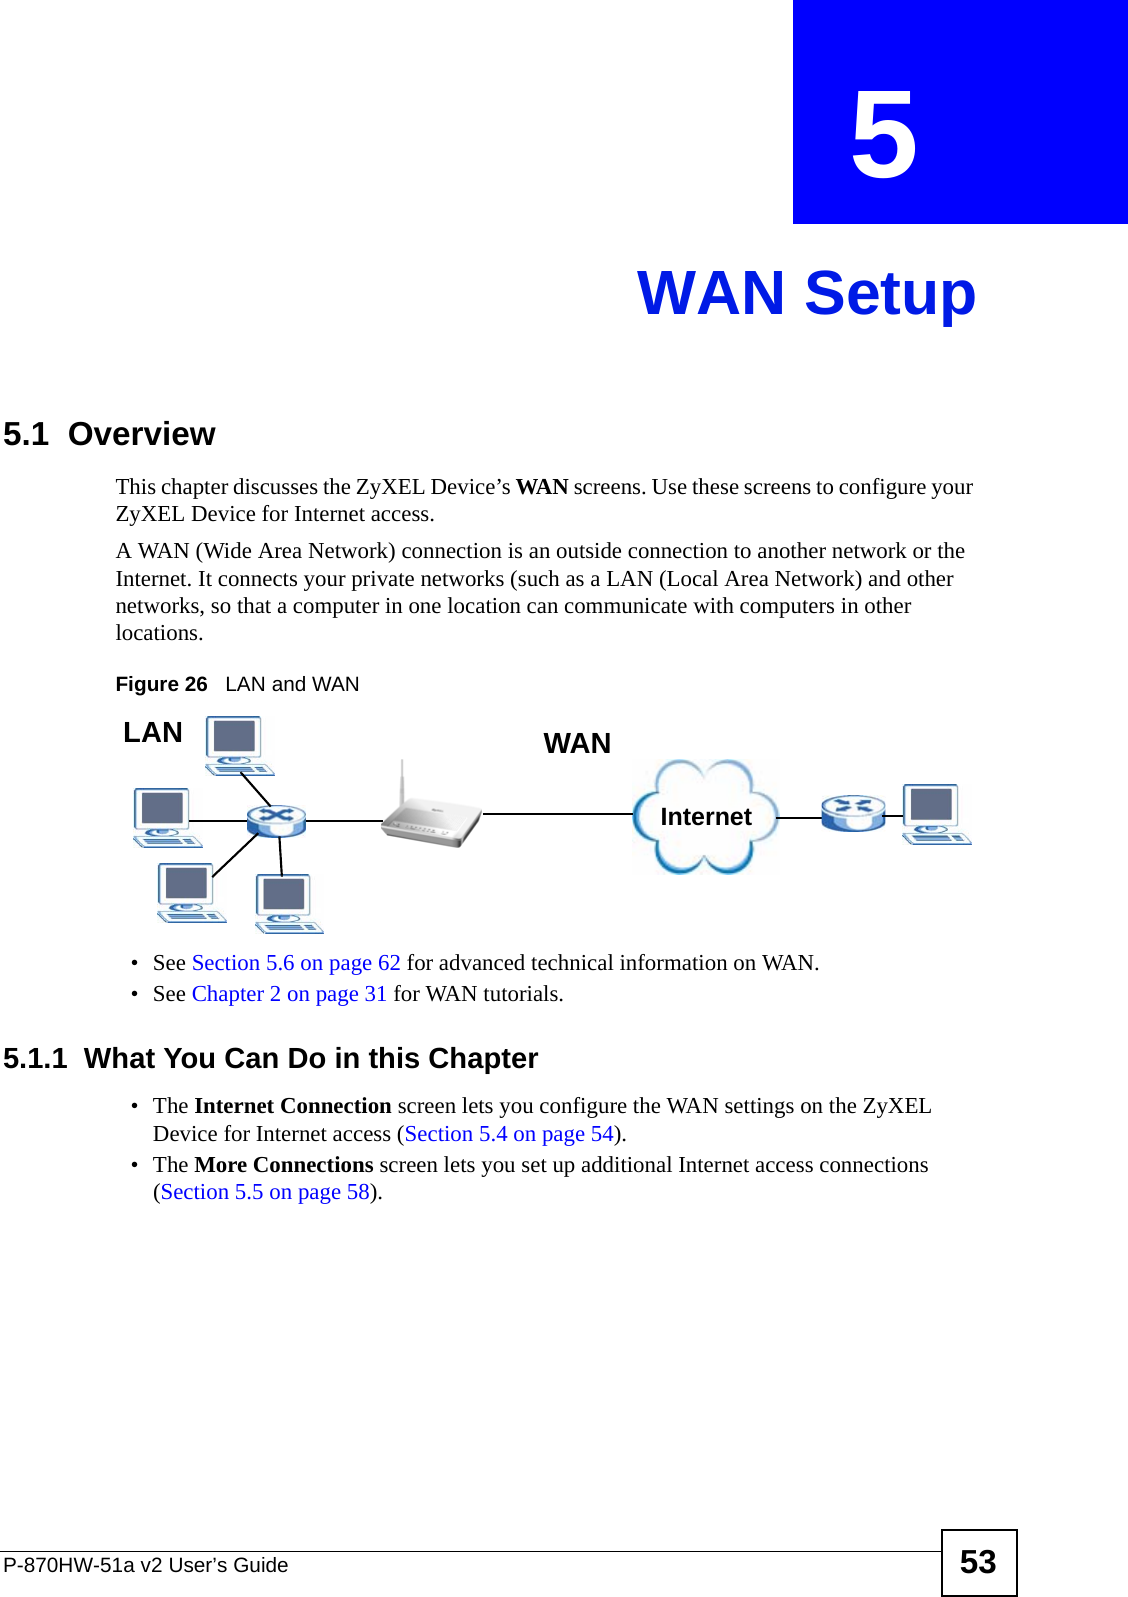 P-870HW-51a v2 User’s Guide 53CHAPTER  5 WAN Setup5.1  OverviewThis chapter discusses the ZyXEL Device’s WAN screens. Use these screens to configure your ZyXEL Device for Internet access.A WAN (Wide Area Network) connection is an outside connection to another network or the Internet. It connects your private networks (such as a LAN (Local Area Network) and other networks, so that a computer in one location can communicate with computers in other locations.Figure 26   LAN and WAN• See Section 5.6 on page 62 for advanced technical information on WAN.• See Chapter 2 on page 31 for WAN tutorials.5.1.1  What You Can Do in this Chapter•The Internet Connection screen lets you configure the WAN settings on the ZyXEL Device for Internet access (Section 5.4 on page 54).•The More Connections screen lets you set up additional Internet access connections (Section 5.5 on page 58).InternetWANLAN